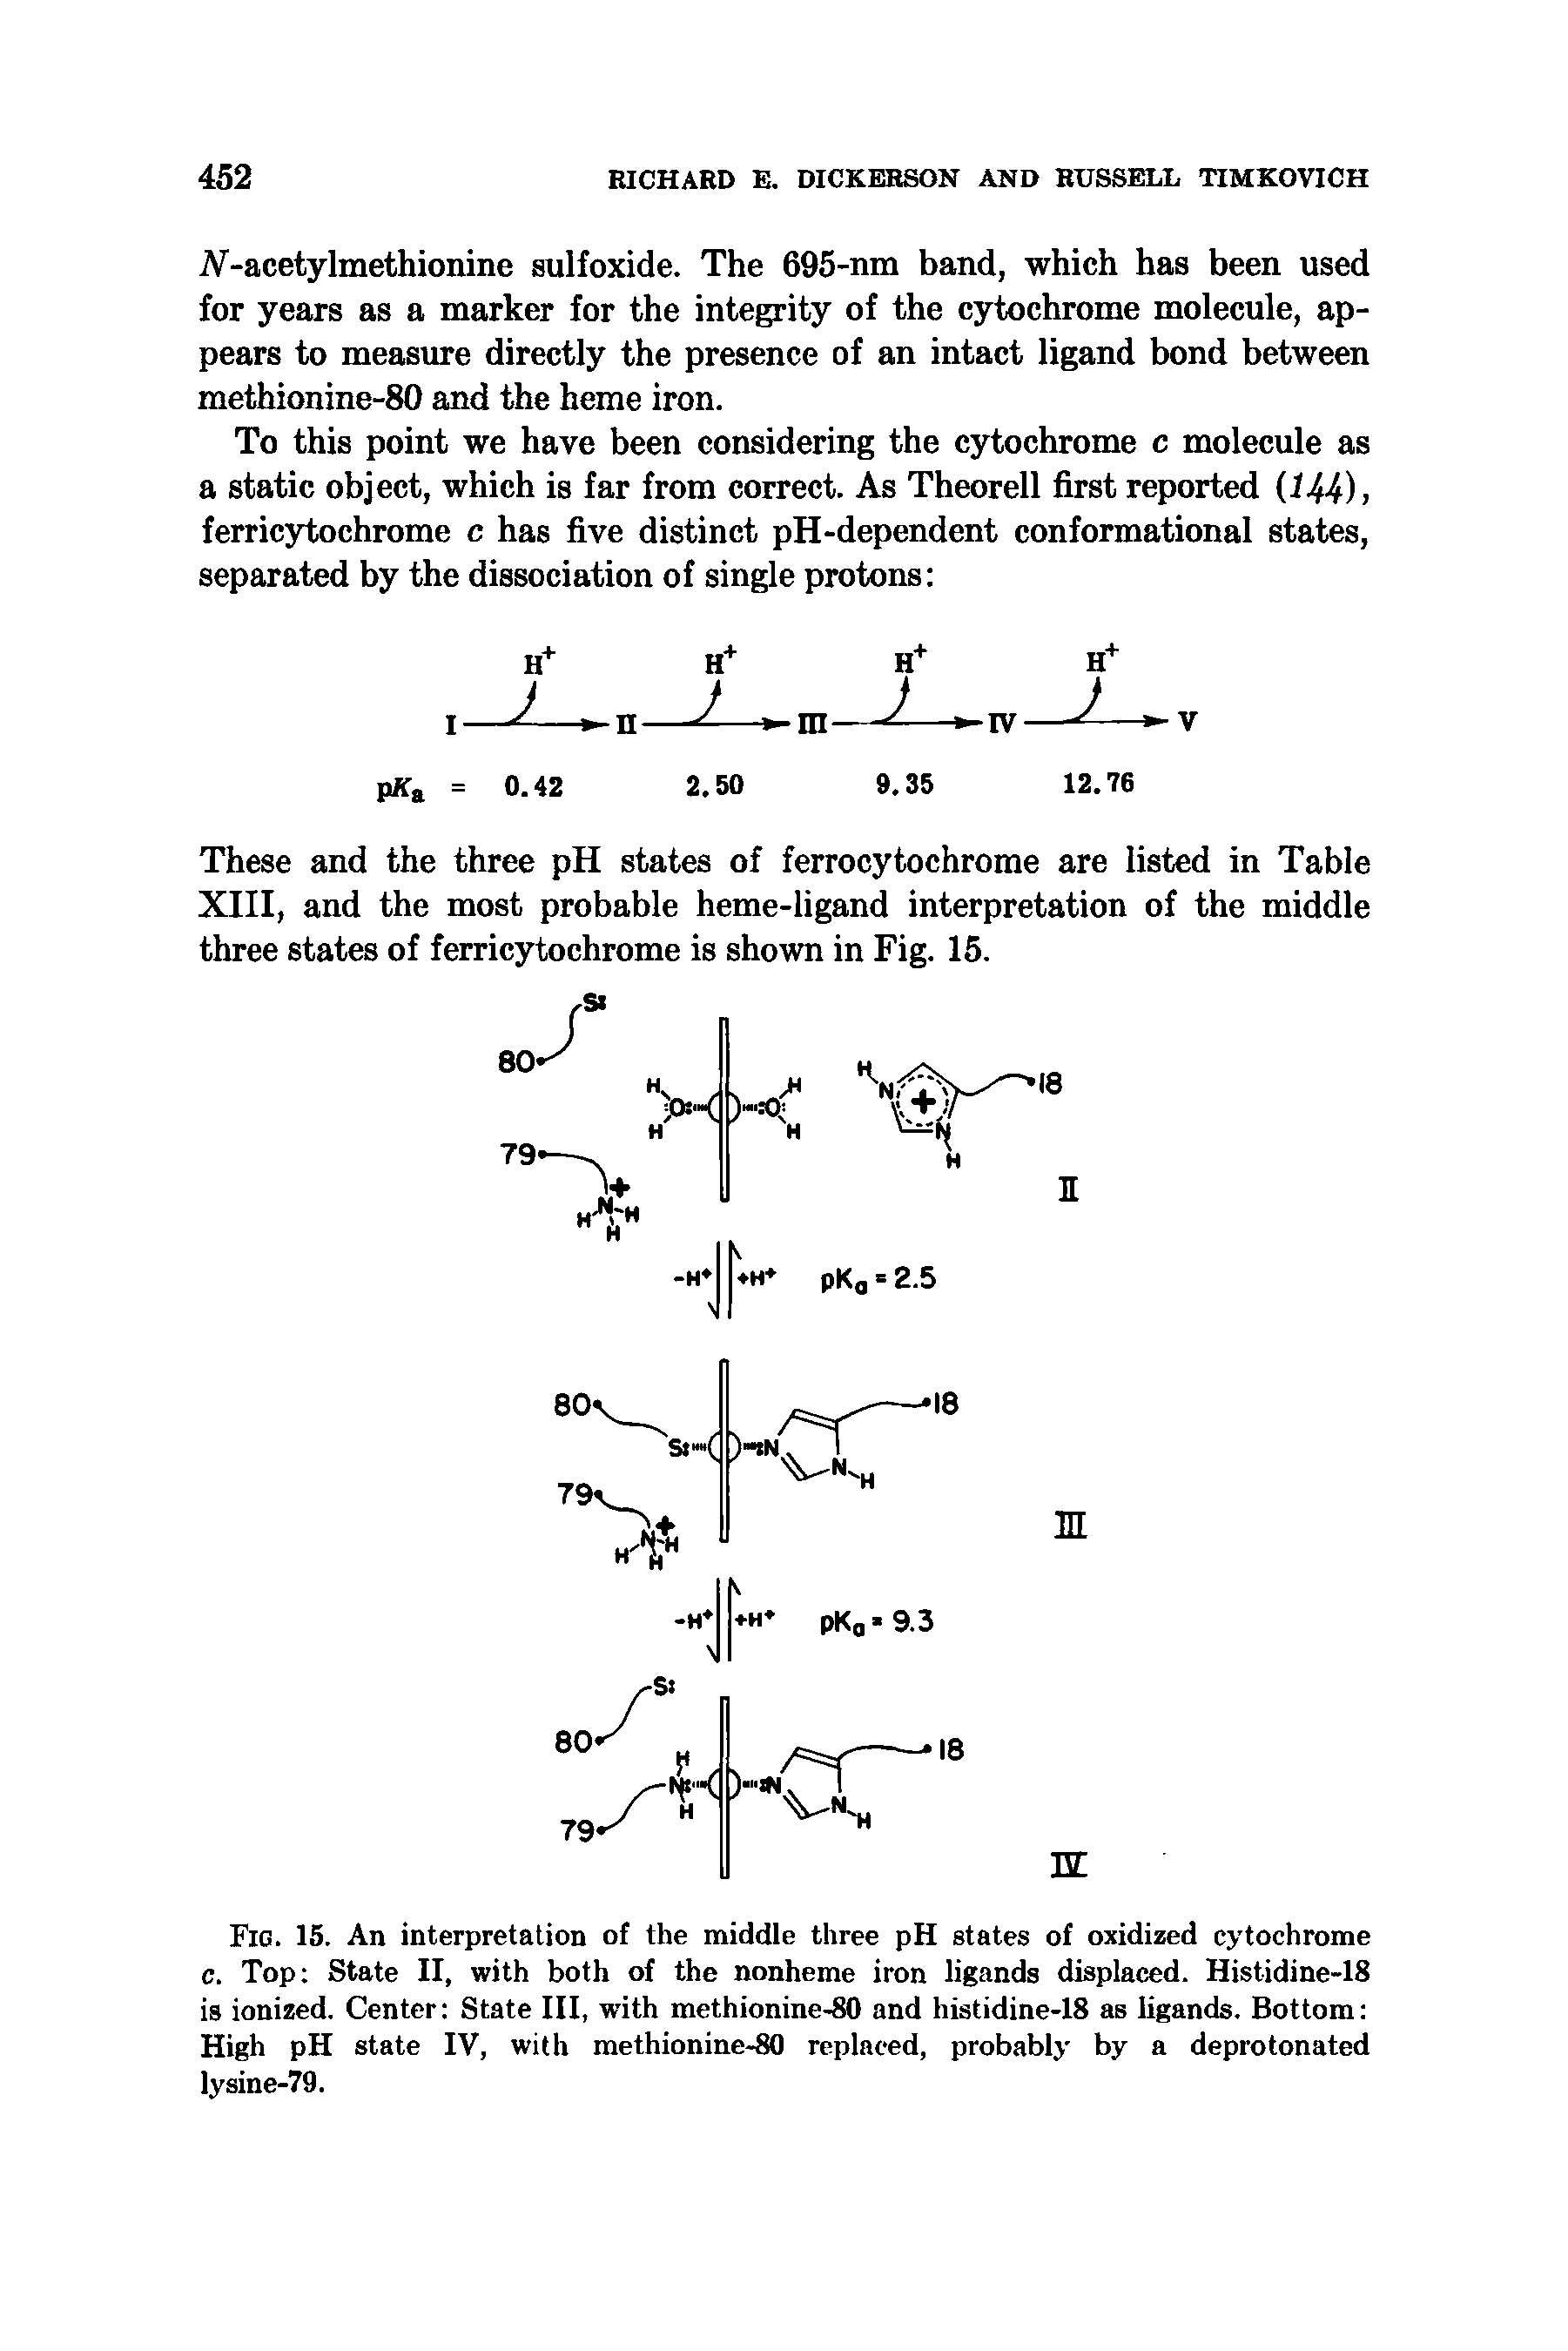 Fig. 15. An interpretation of the middle three pH states of oxidized cytochrome c. Top State II, with both of the nonheme iron ligands displaced. Histidine-18 is ionized. Center State III, with methionine-80 and histidine-18 as ligands. Bottom High pH state IV, with methionine-80 replaced, probably by a deprotonated lysine-79.